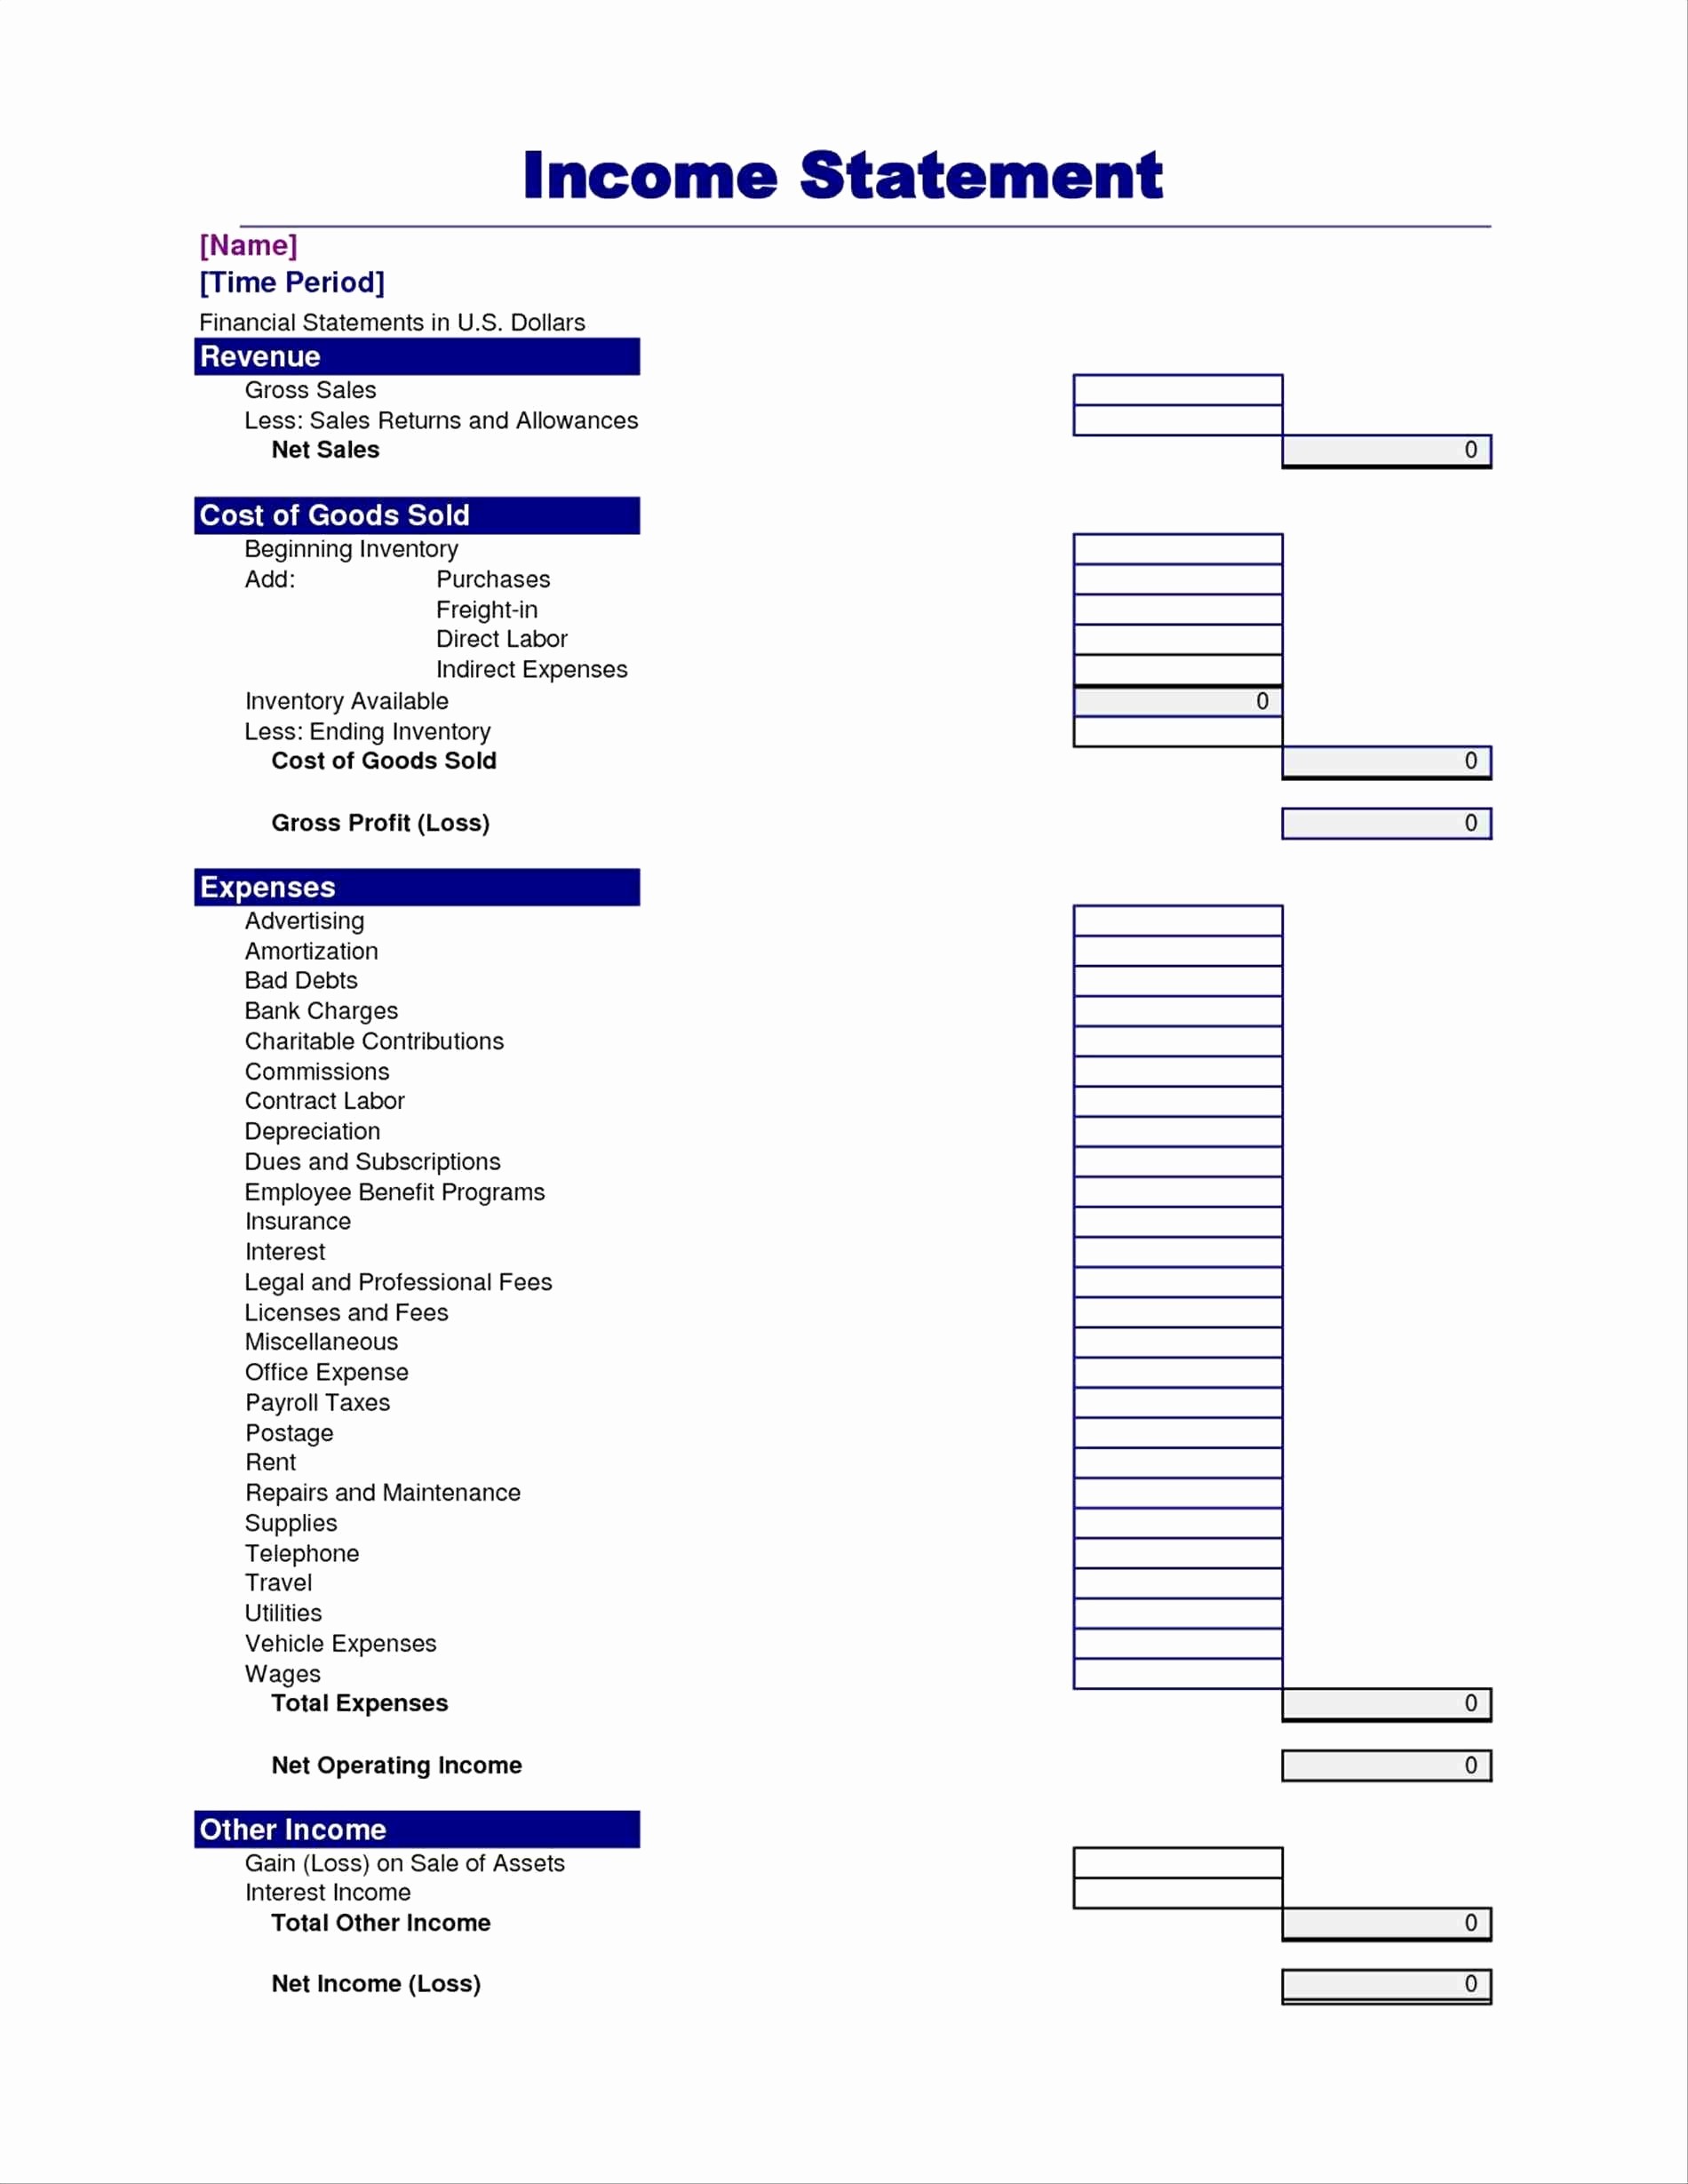 50 Awesome Business Income Worksheet Template DOCUMENT IDEAS